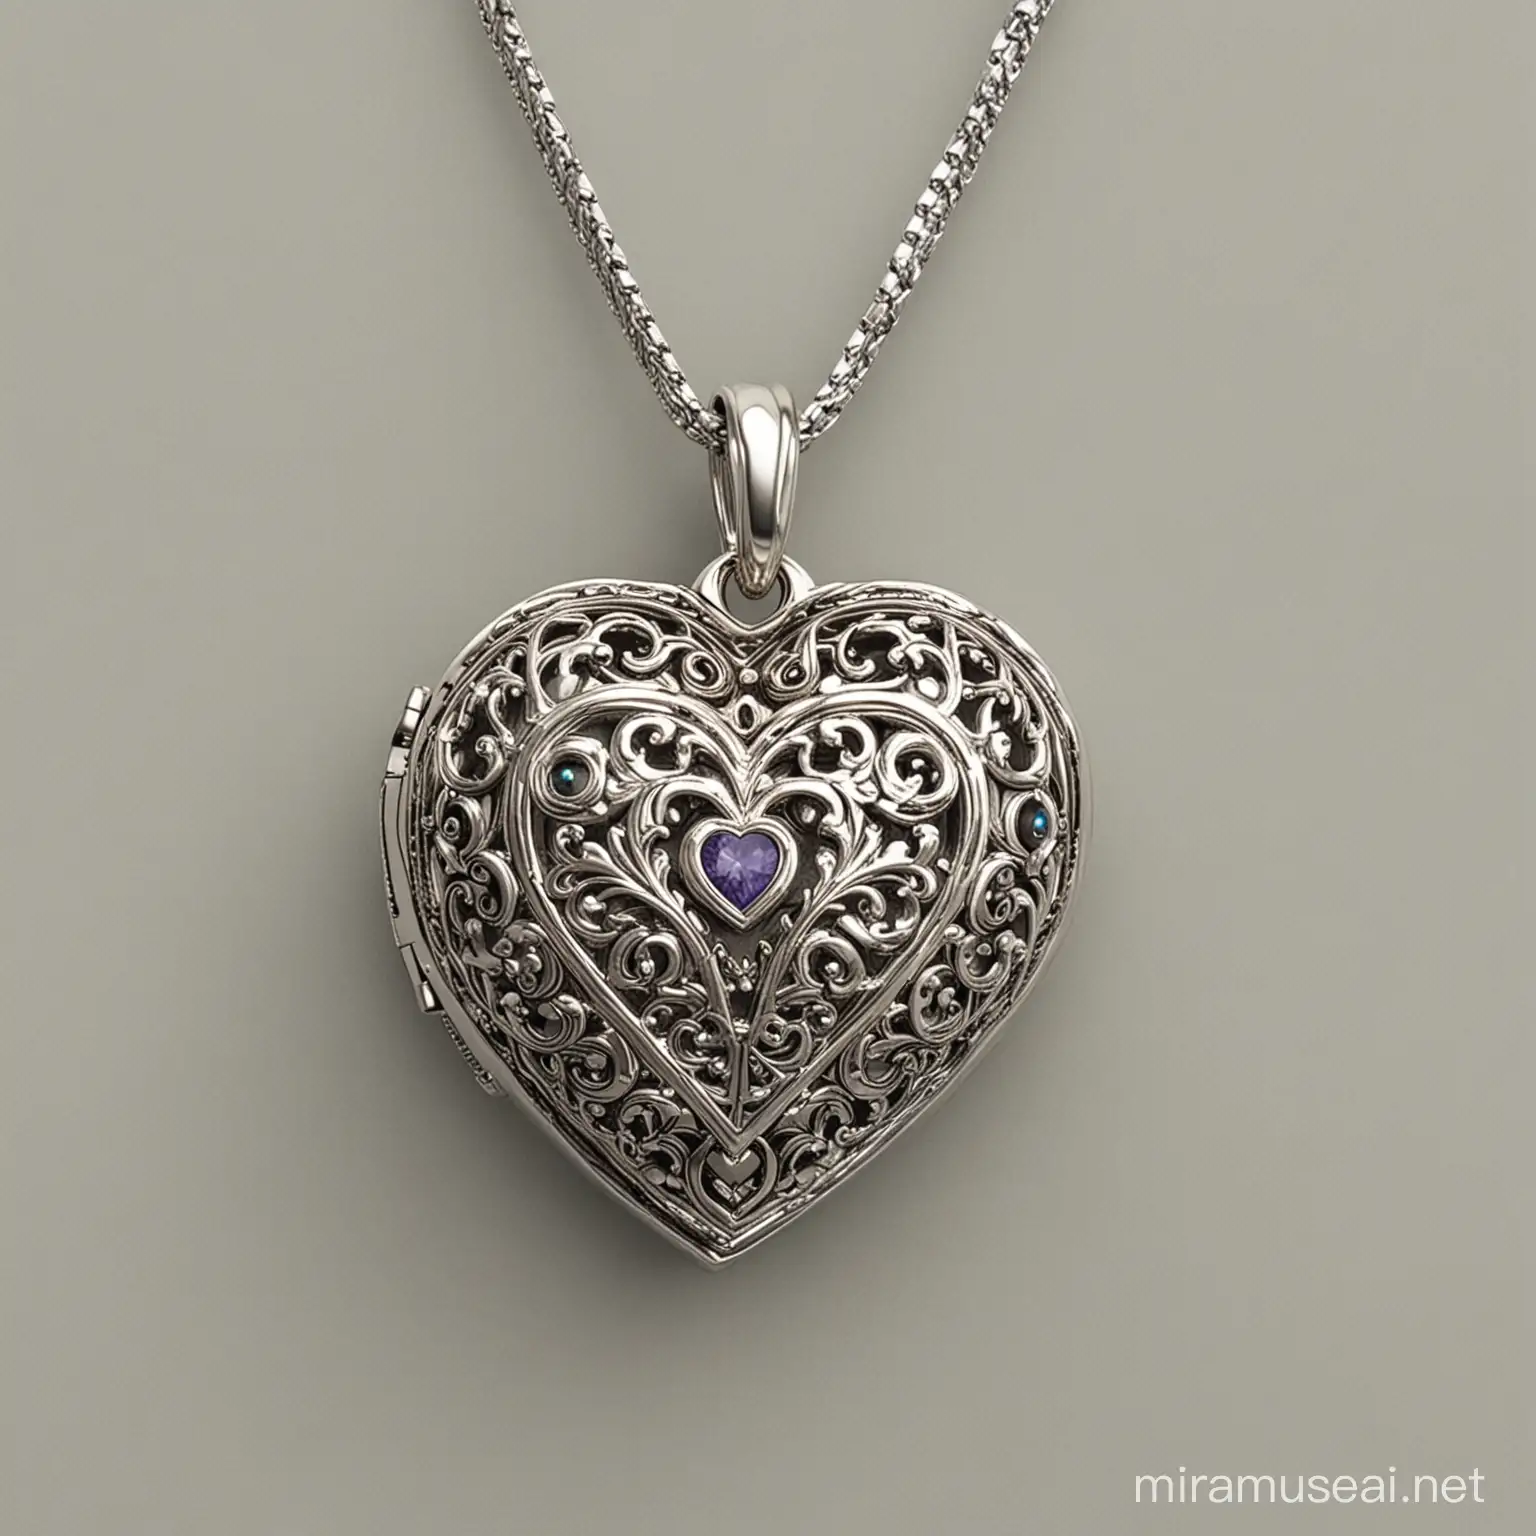 Intricately Detailed Heartshaped Pendant with Divine Symbolism